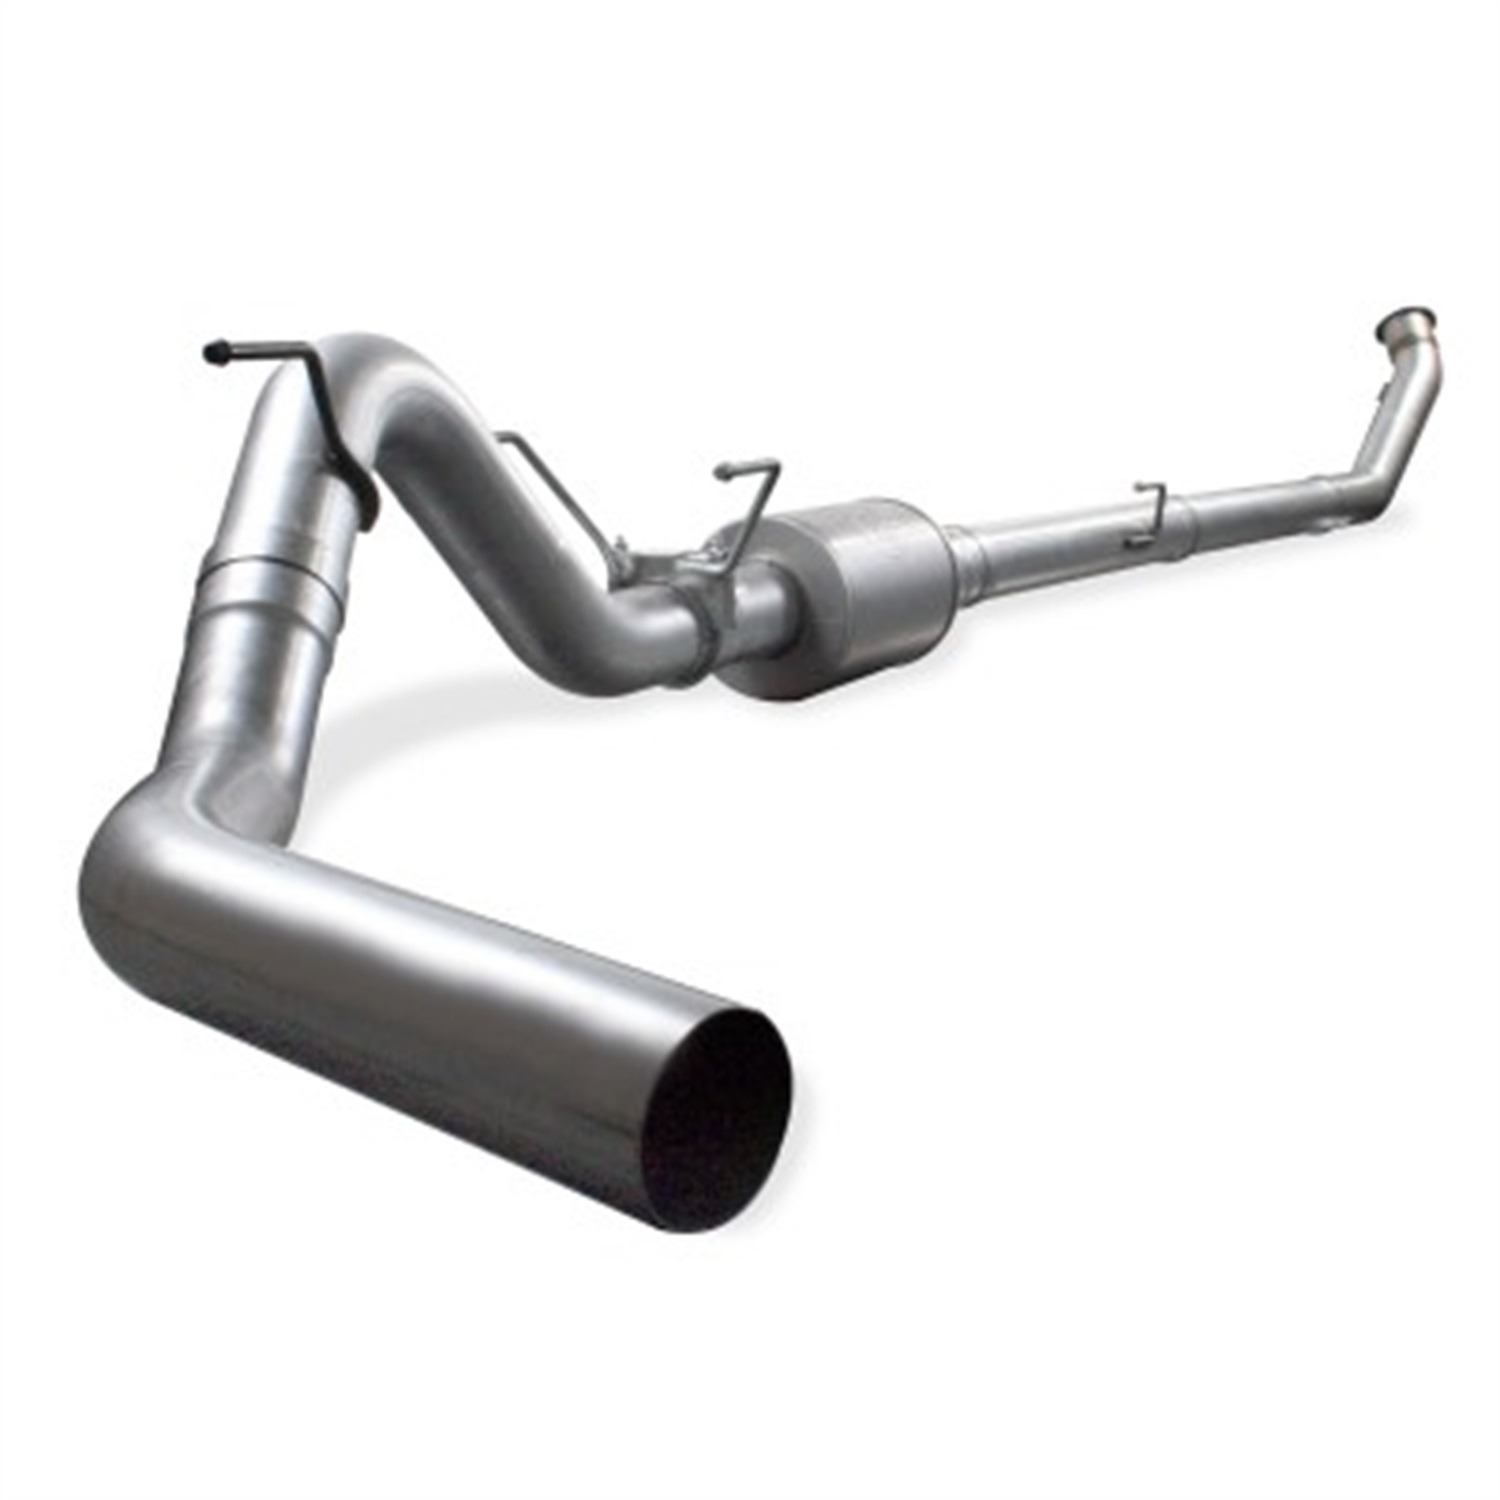 aFe Power aFe Power 49-03001 ATLAS Turbo-Back Exhaust System Fits 94-97 F-250 F-350